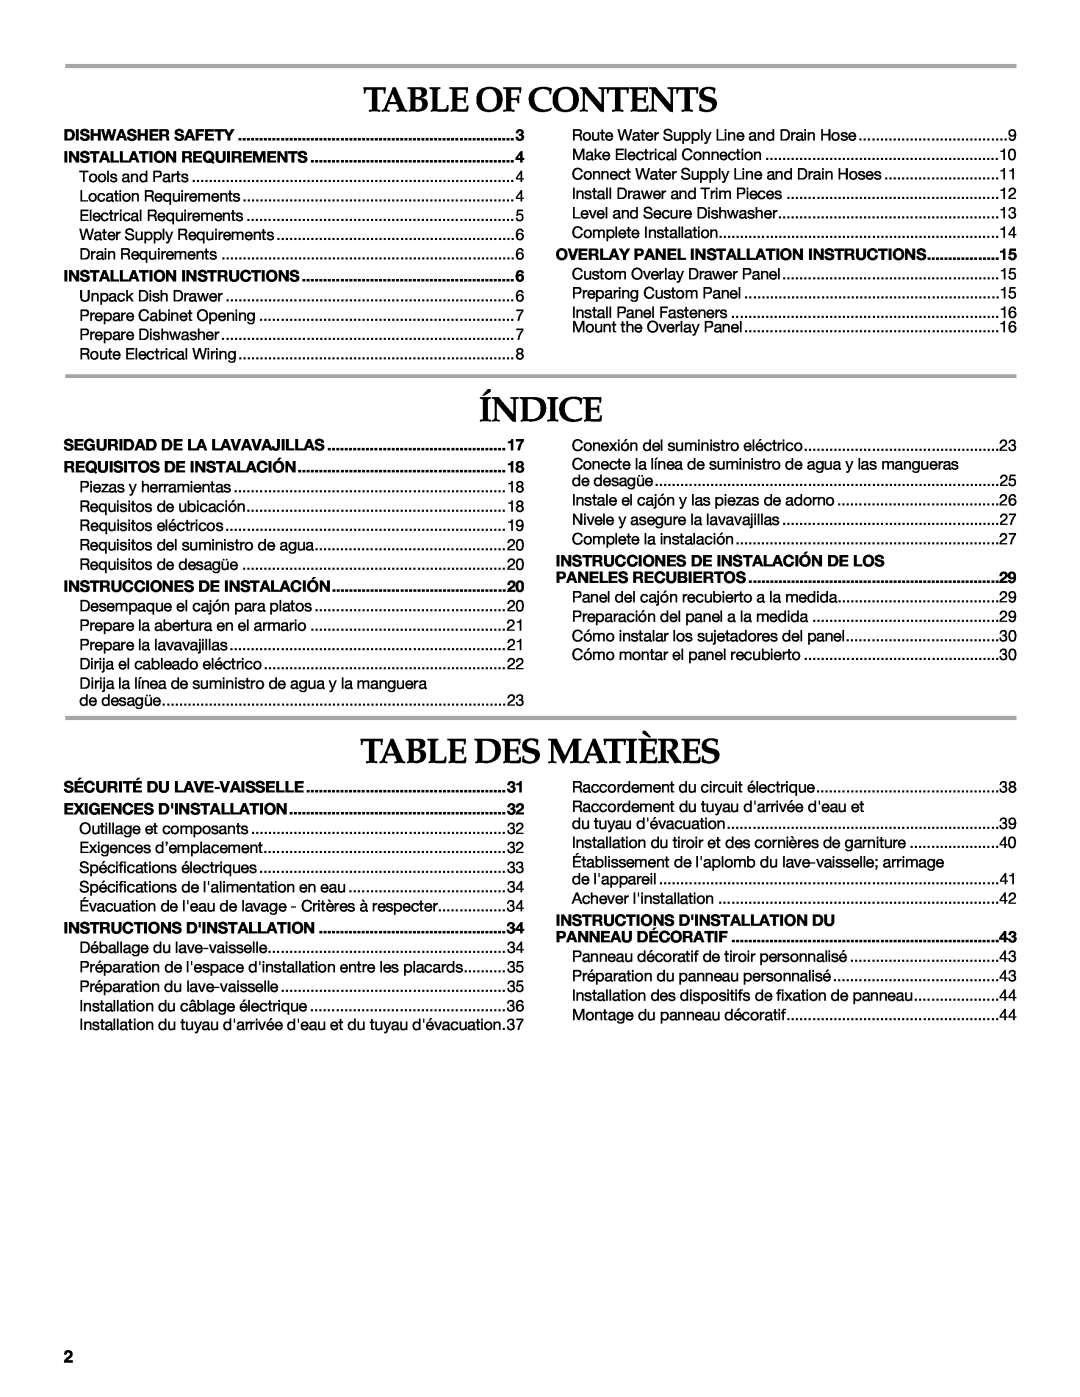 KitchenAid KUDD03STBL Table Of Contents, Índice, Table Des Matières, Dishwasher Safety, Installation Requirements 